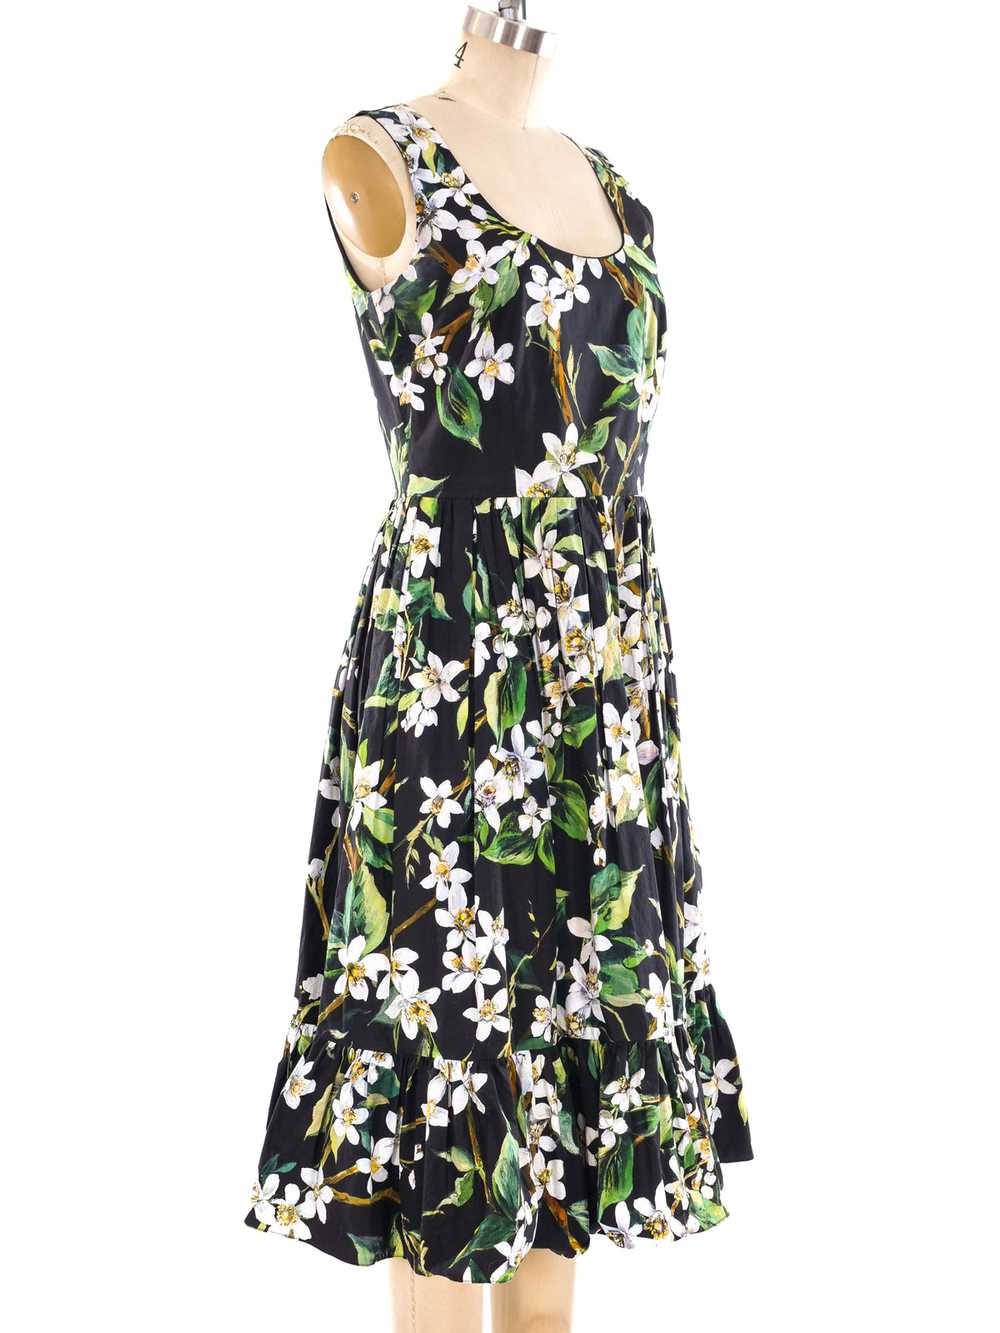 Dolce and Gabbana Floral Printed Tank Dress - image 3